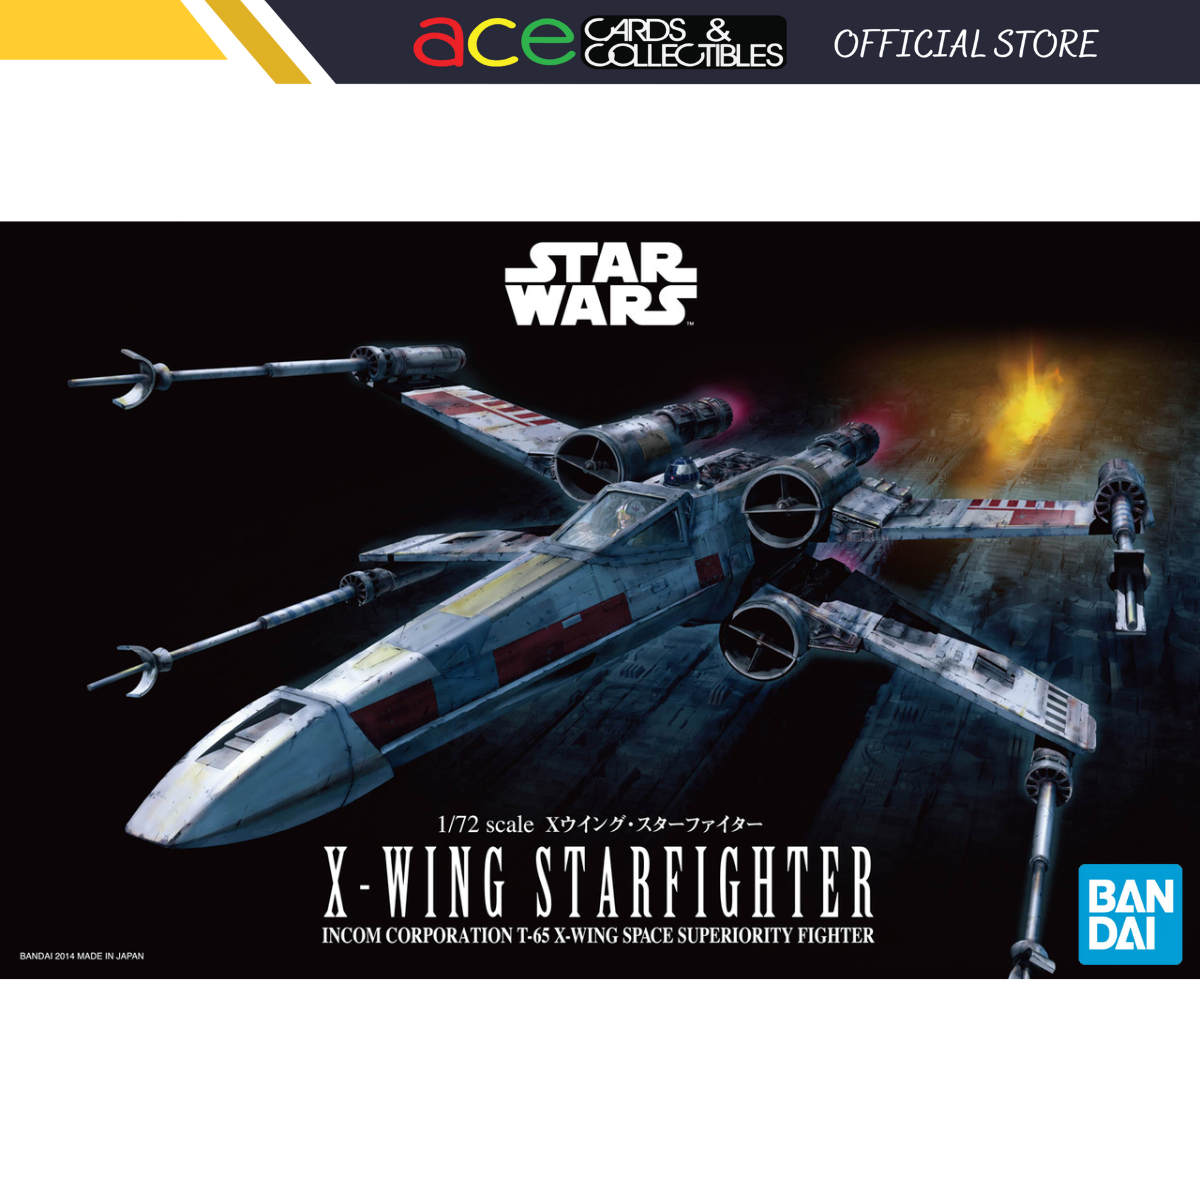 Star Wars Vehicle Model 1/72 X-Wing Starfighter-Bandai-Ace Cards & Collectibles